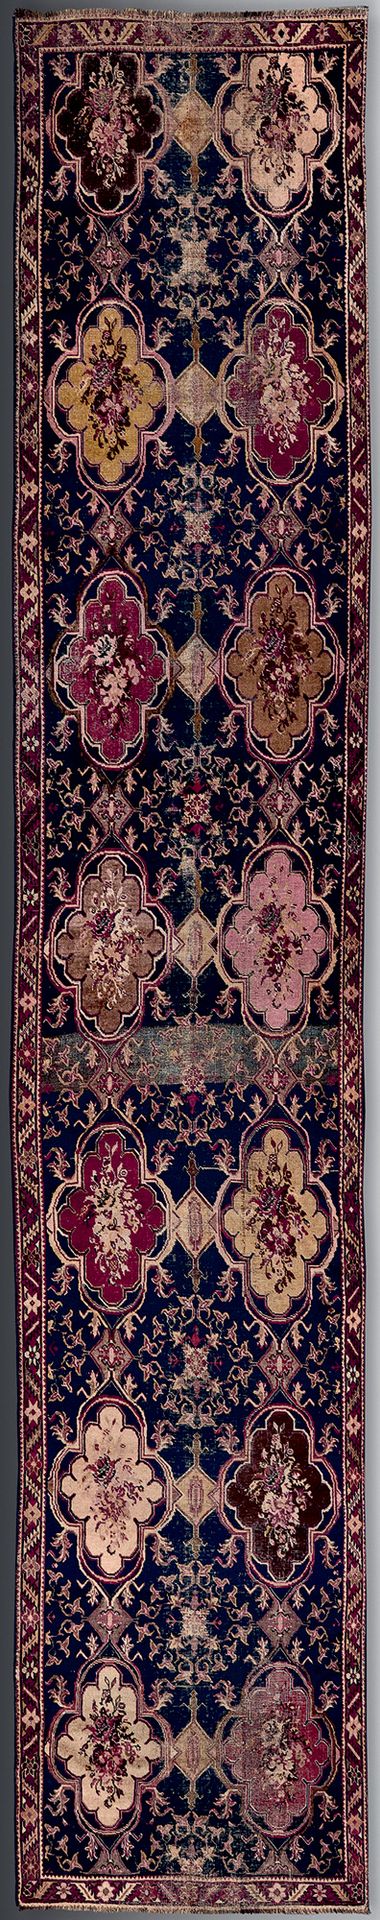 Null Gallery carpet decorated with floral cartouches on a dark blue-black backgr&hellip;